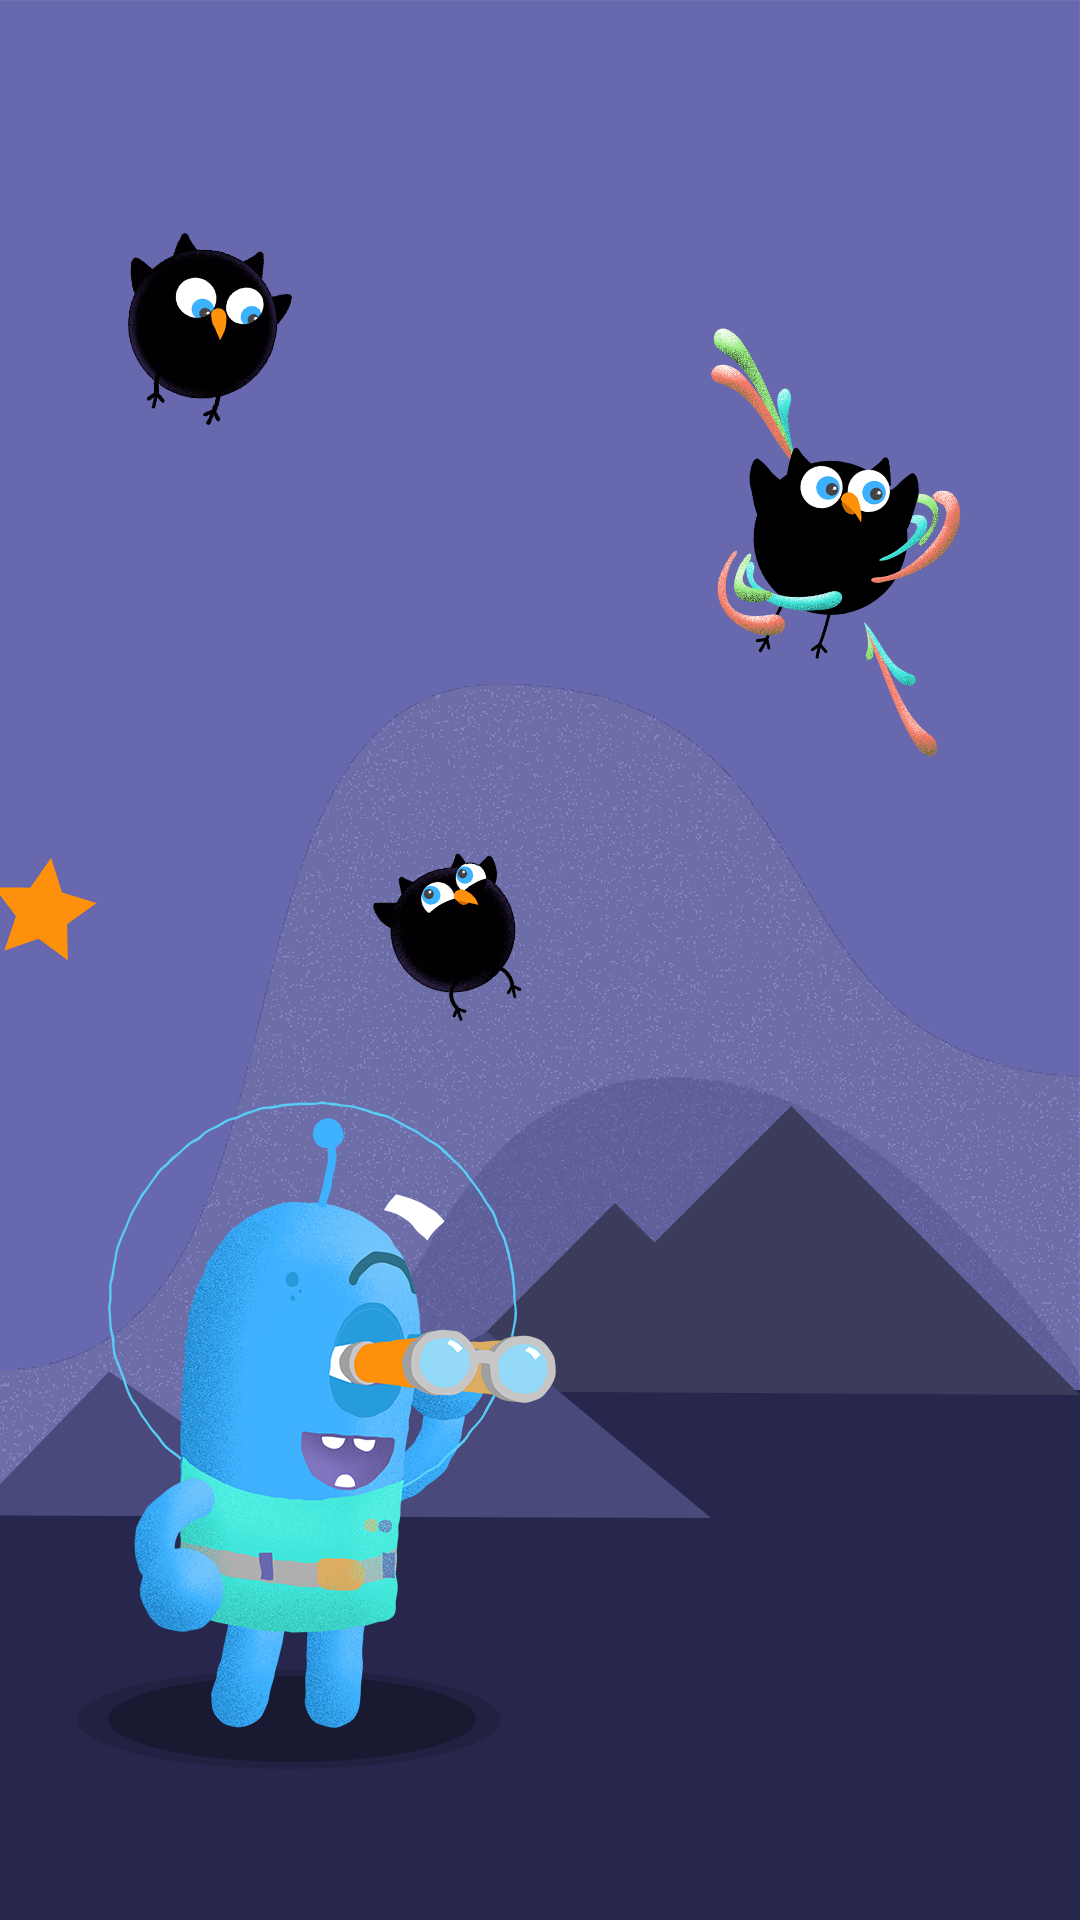 A vertical image with a blue cartoon character looking through binoculars as black hole birds fly above them.